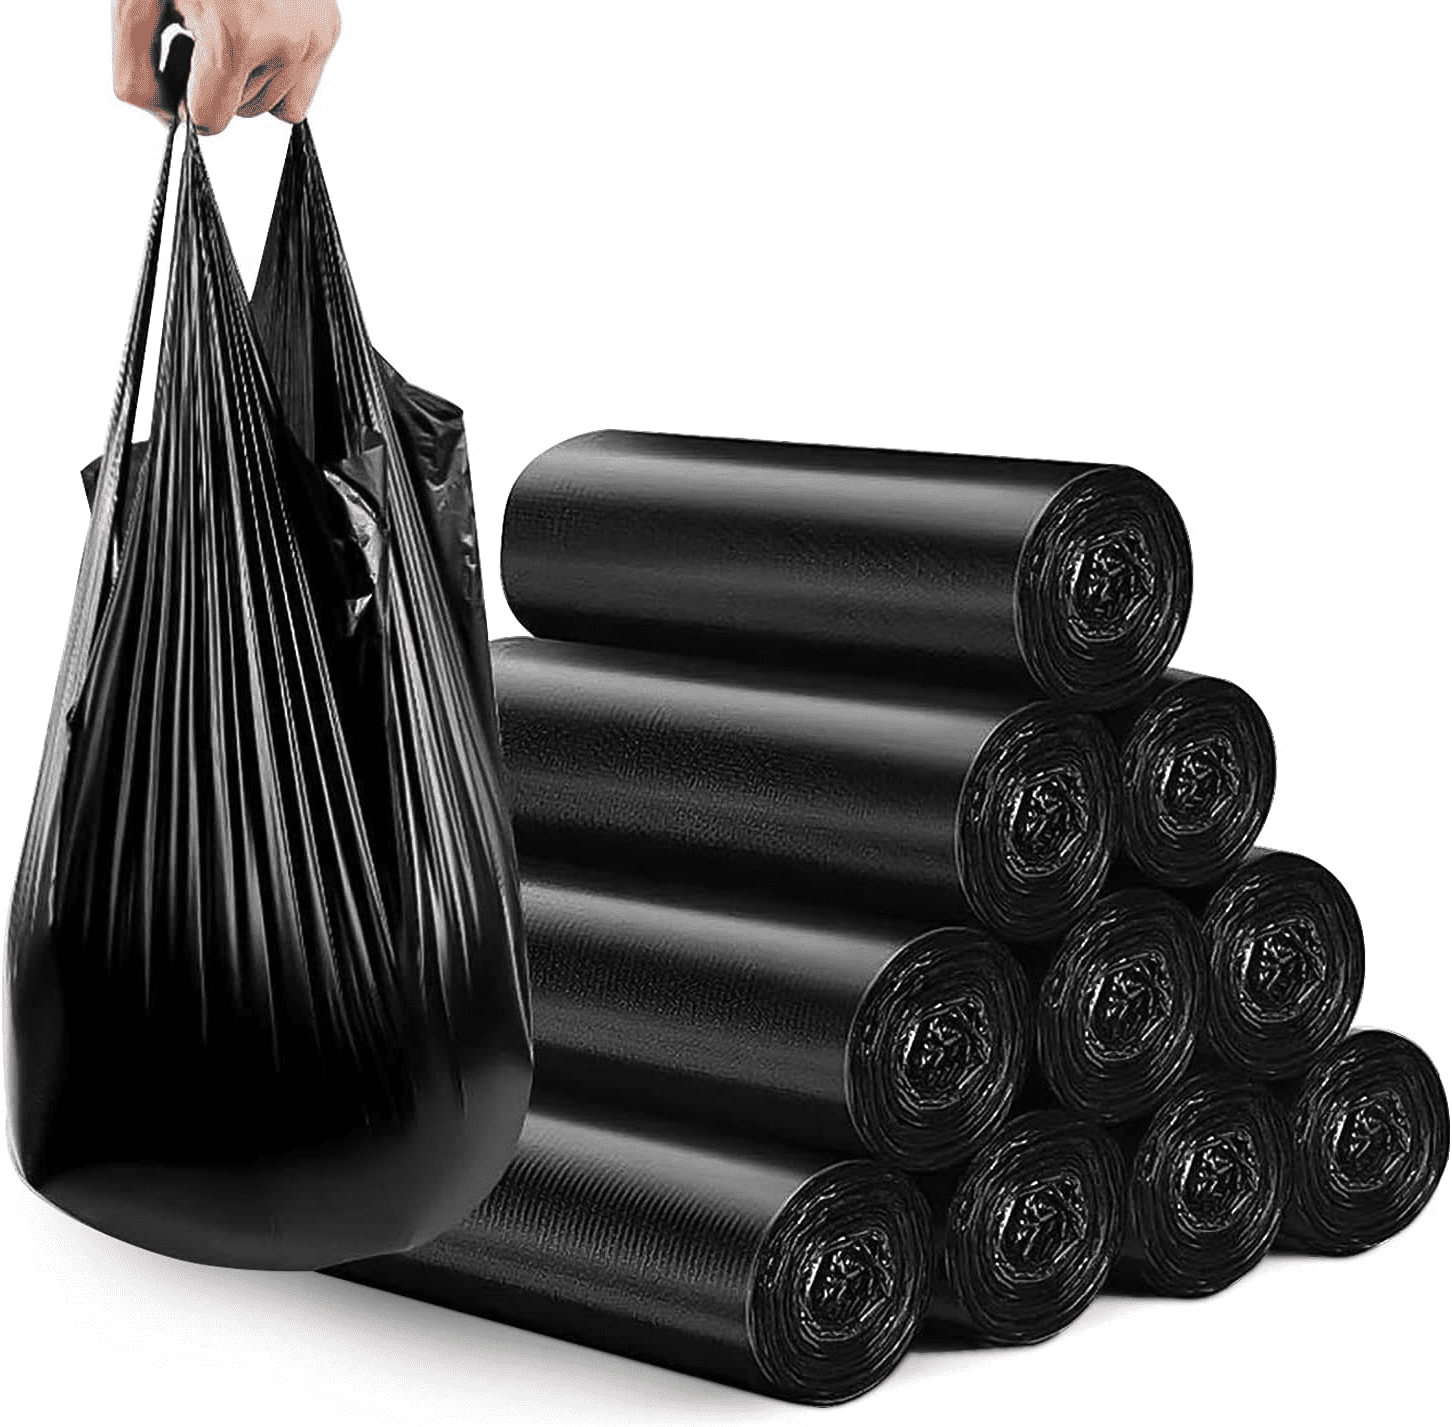 MakWorFre 100 Count 4 Gallon Drawstring Trash Bags, Unscented Thickened  Small Garbage Bags for Bedroom, Kitchen, Bathroom, Small Trash Bags, Black 4  Gal(15 Liter) Garbage Bag